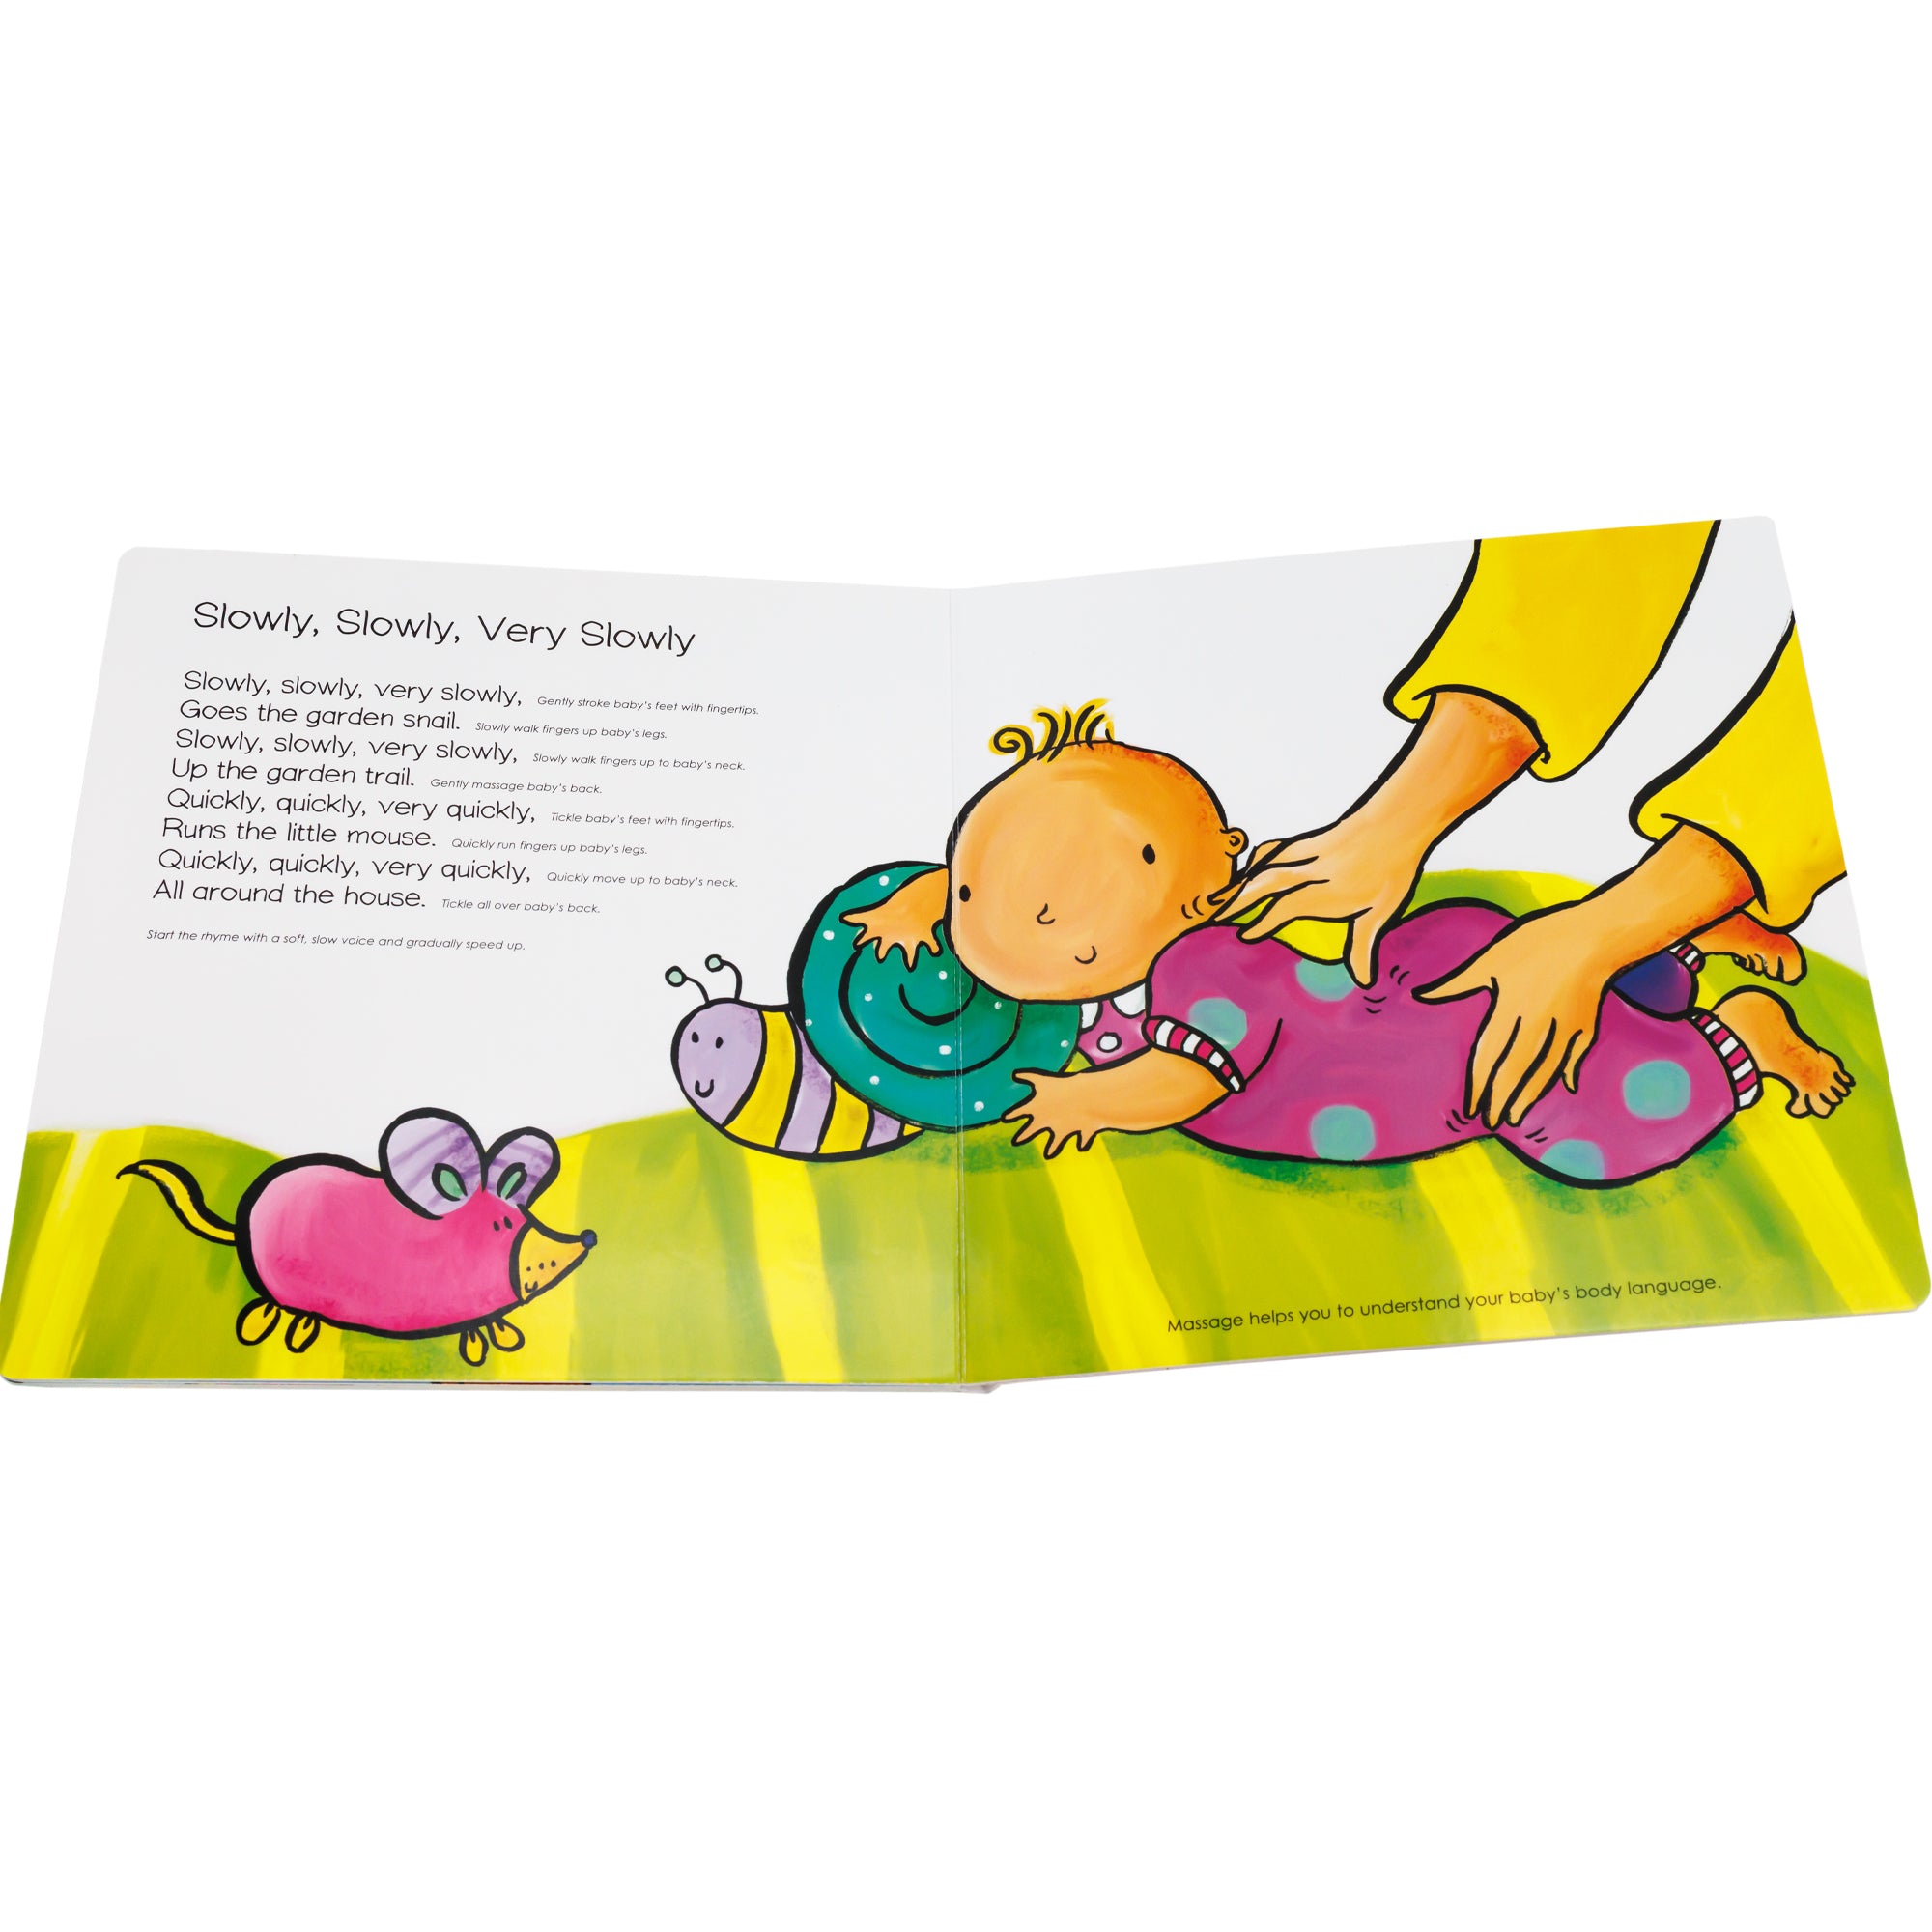 Inside book showing a baby laying on her tummy playing with a snail toy and being tickled by a pair of hands.